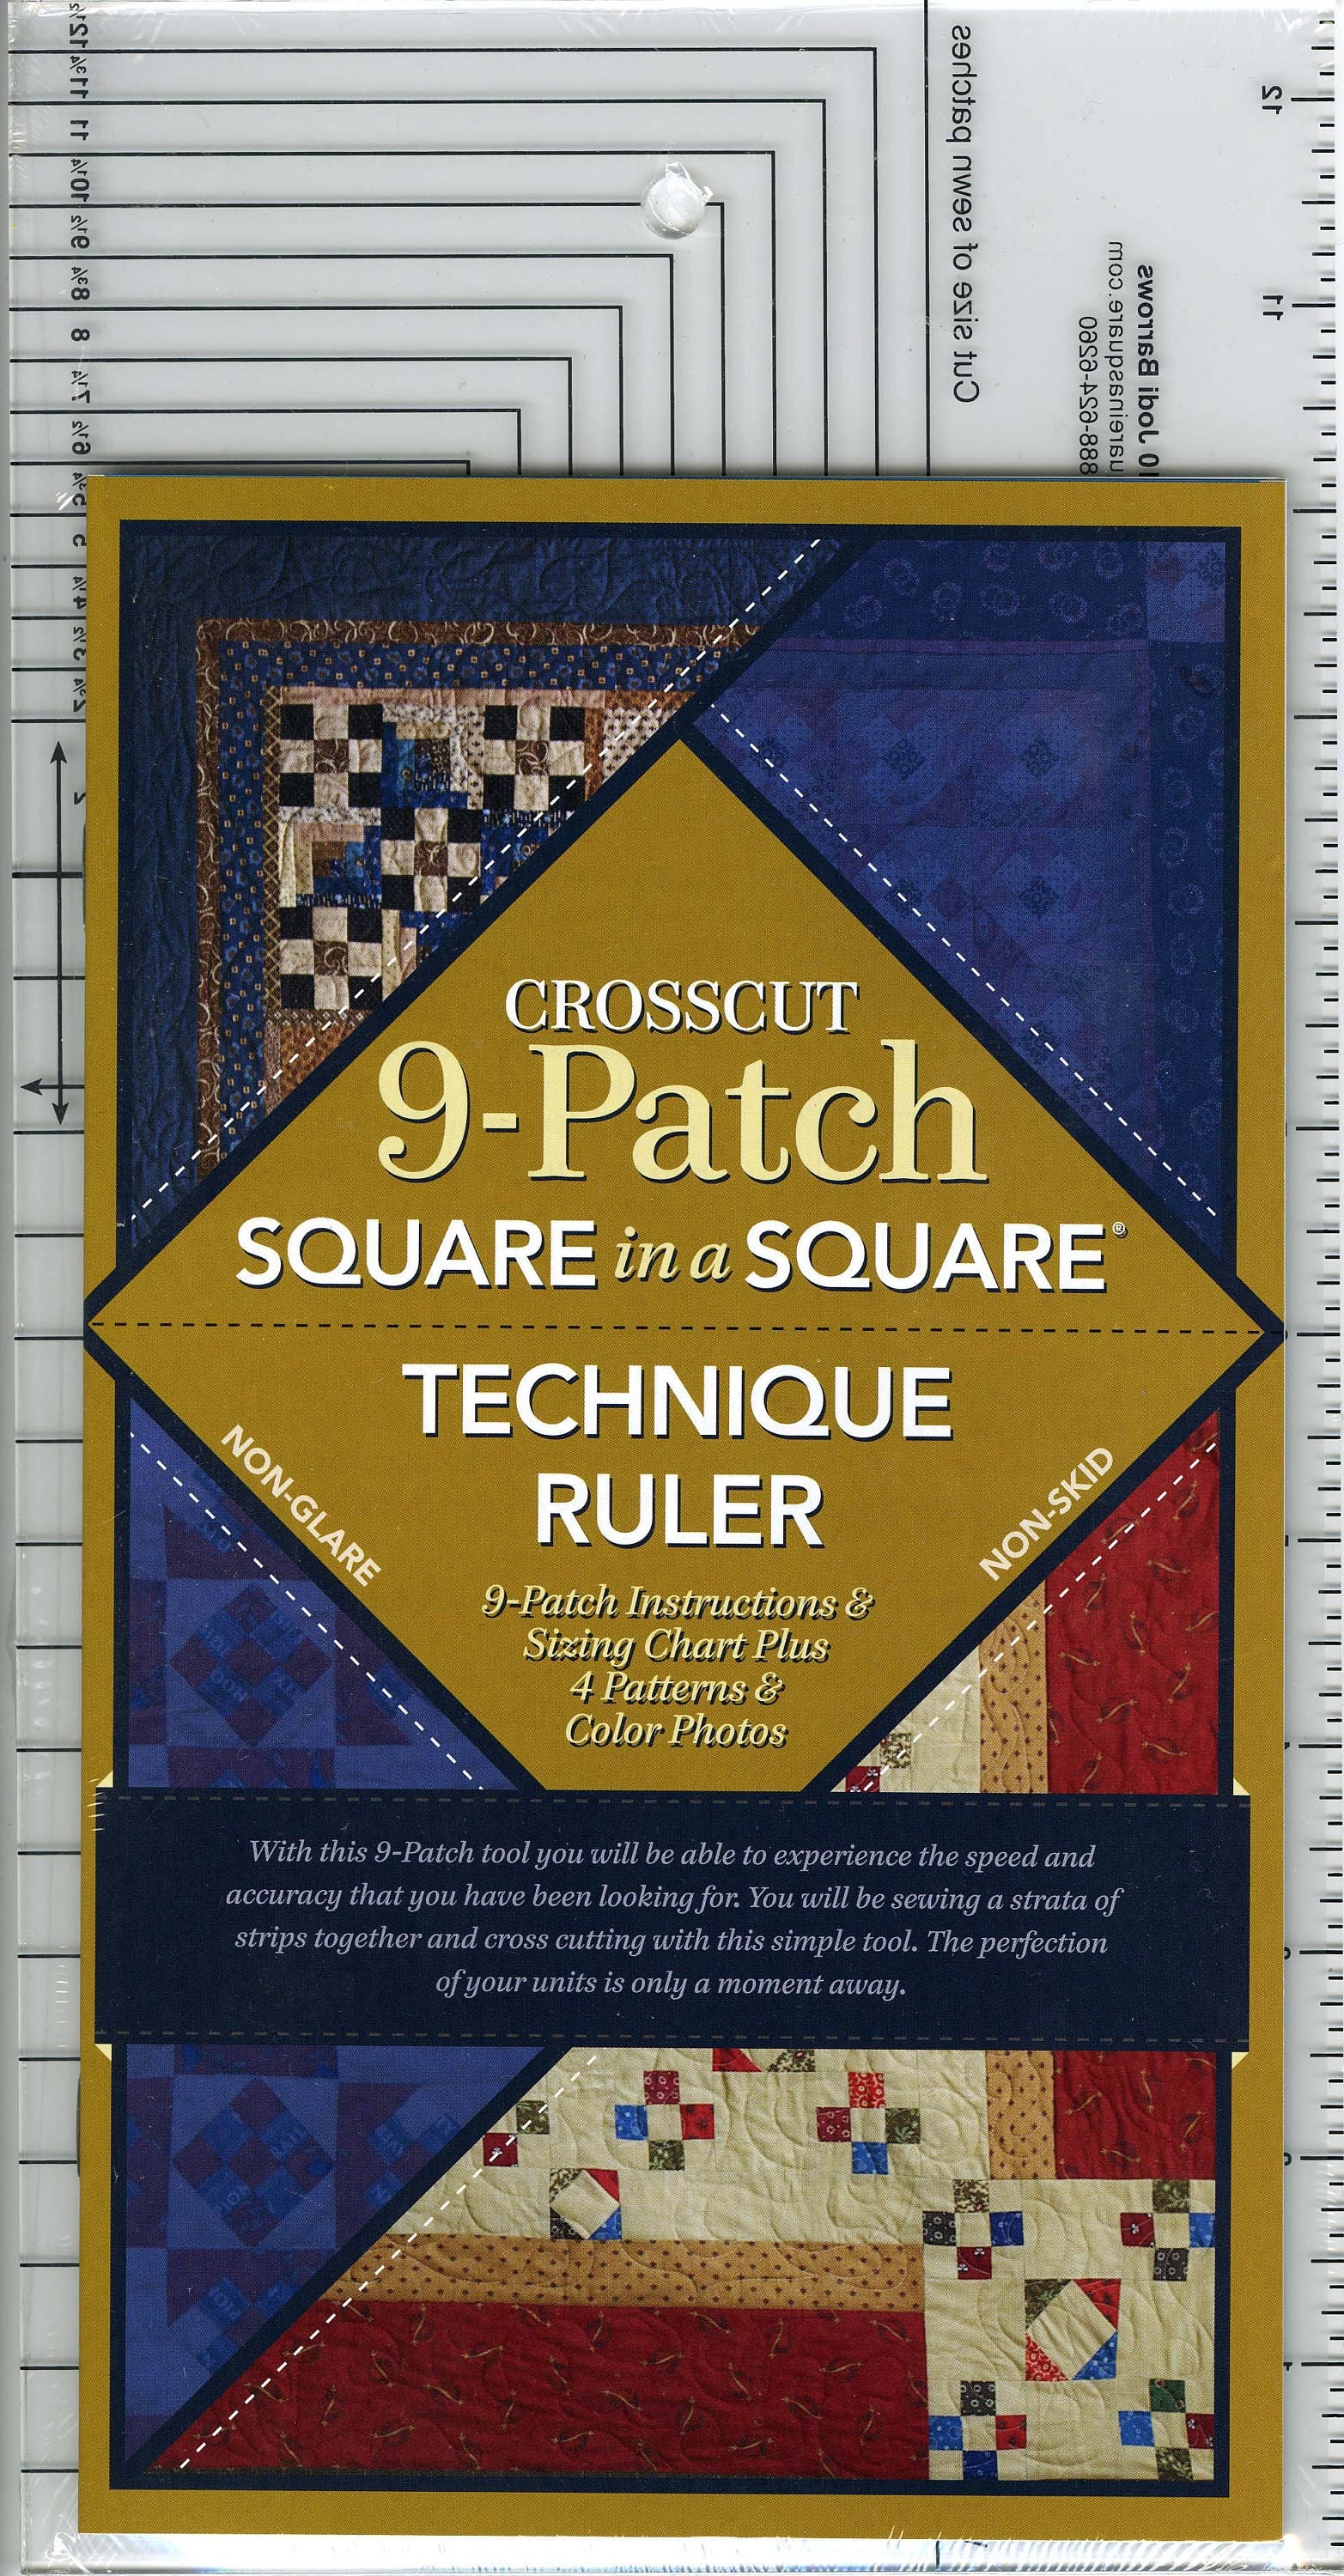 Crosscut 9 Patch Quilt Ruler With Book by Jodi Barrows for Square in a Square